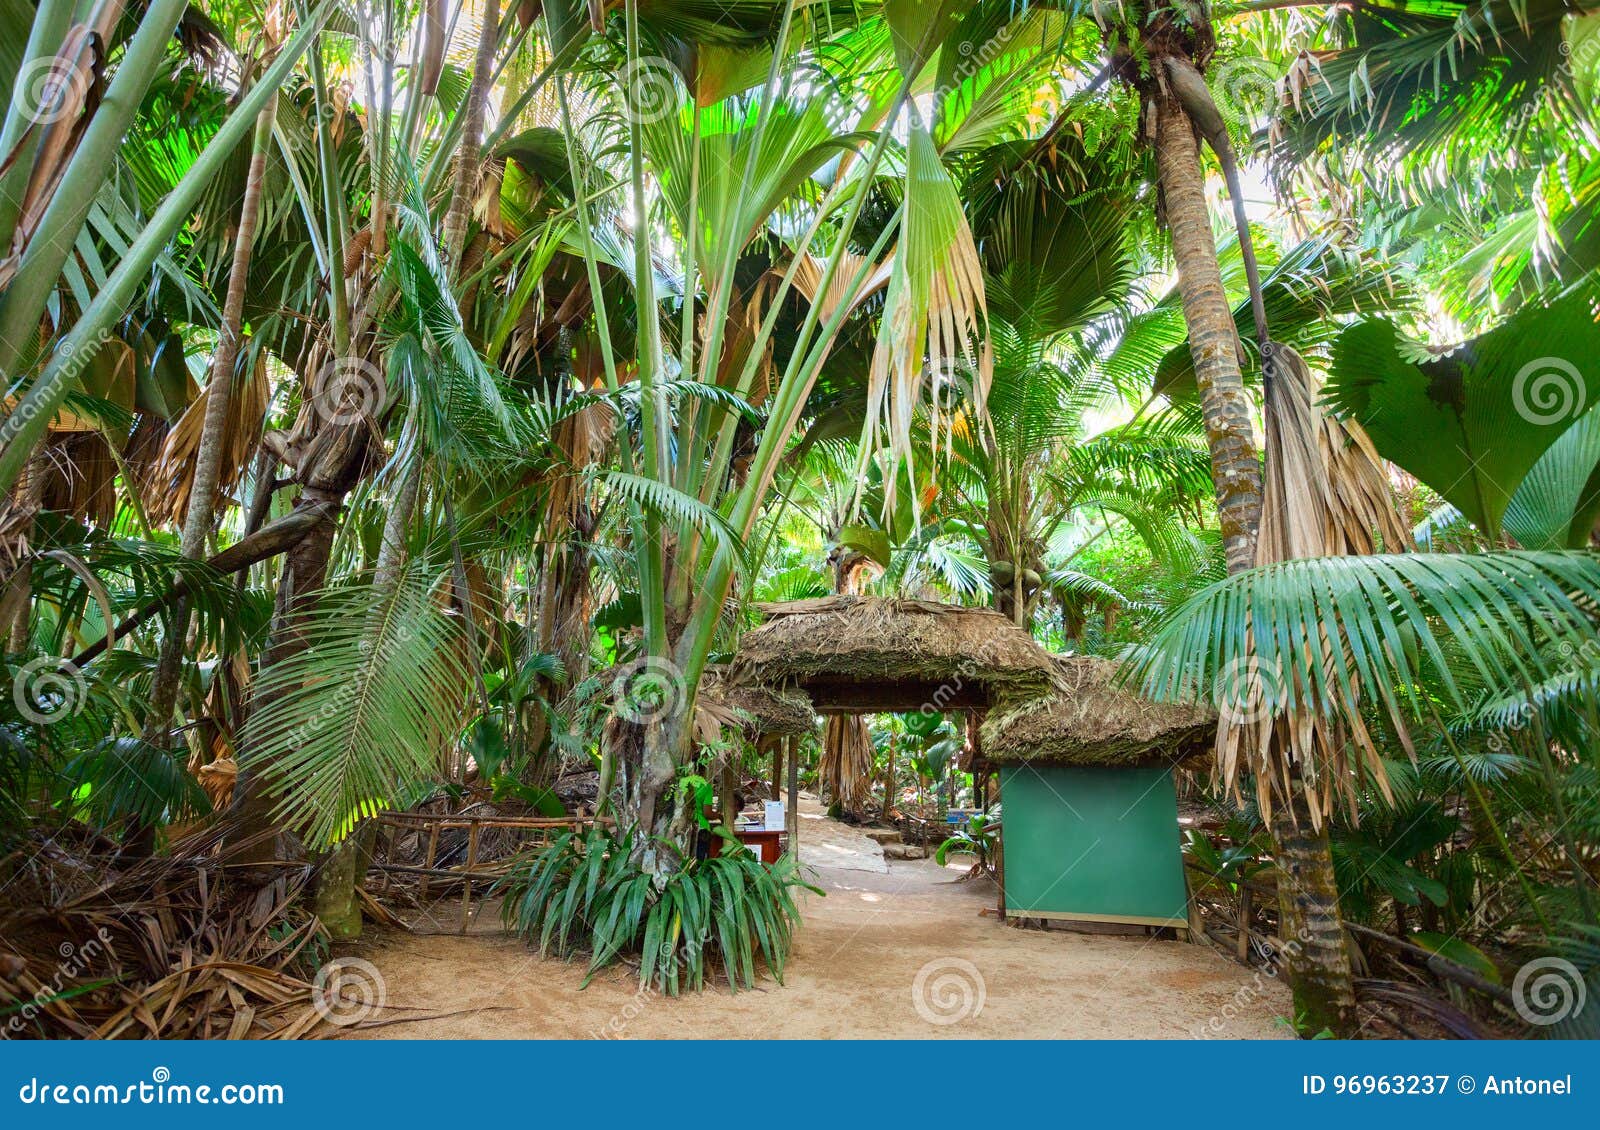 the vallee de mai palm forest may valley, island of praslin, seychelles